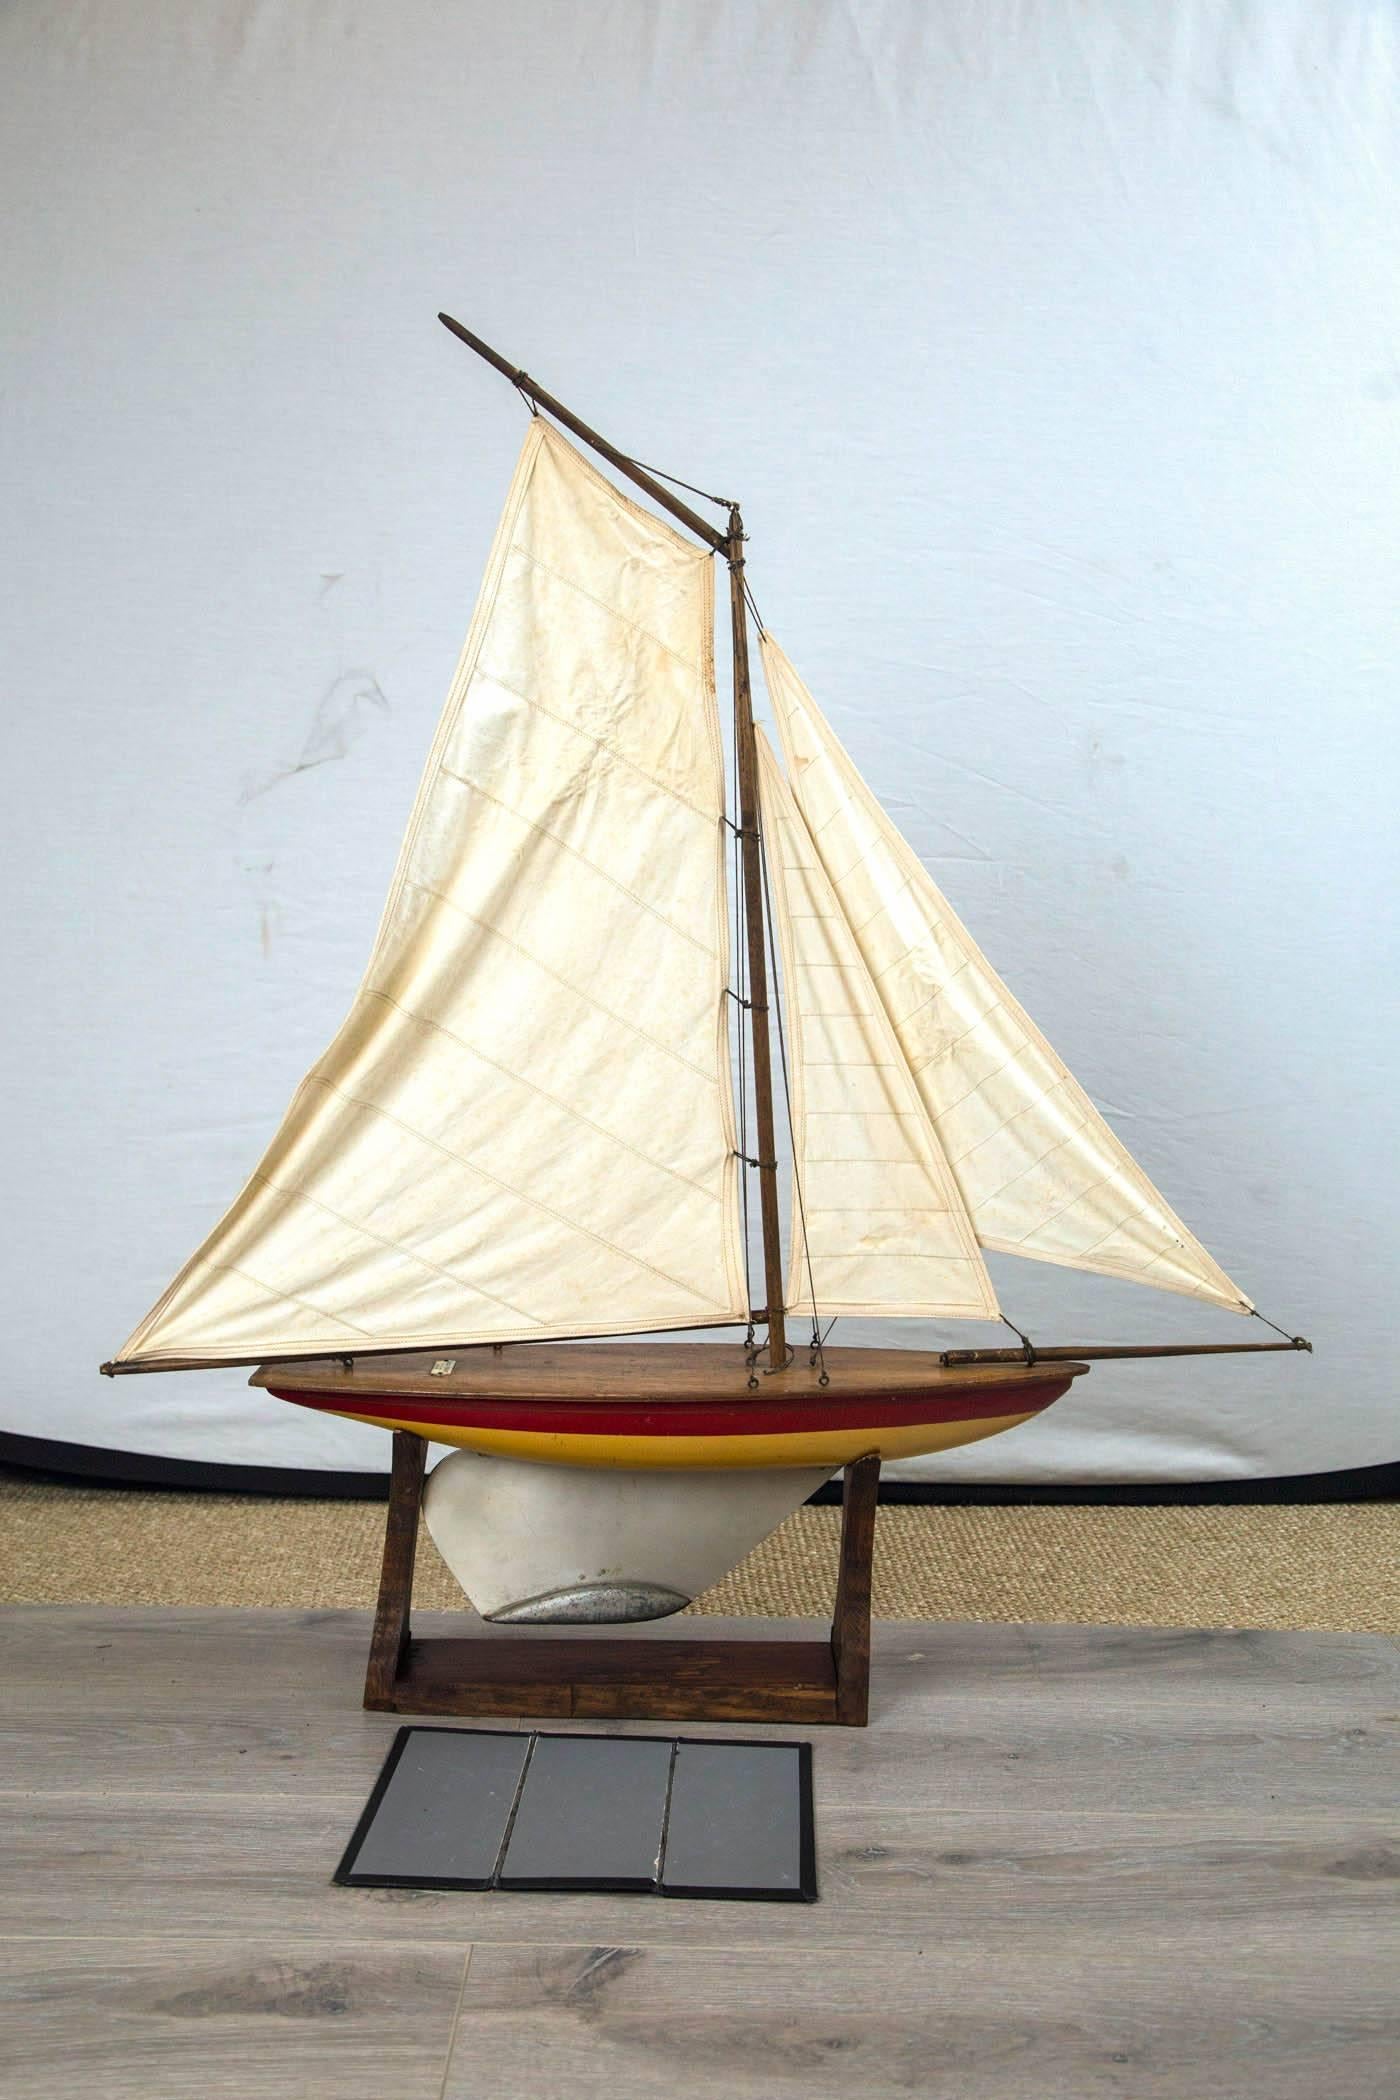 Vintage sailing pond boat, 'yacht Ailsa, circa 1930, Scotland. Handmade craftsmanship with yellow and red painted hull, varnished wood deck, metal rudder. Plaque reads 'Ailsa yacht, made in larges, Scotland'. Custom oak stand.